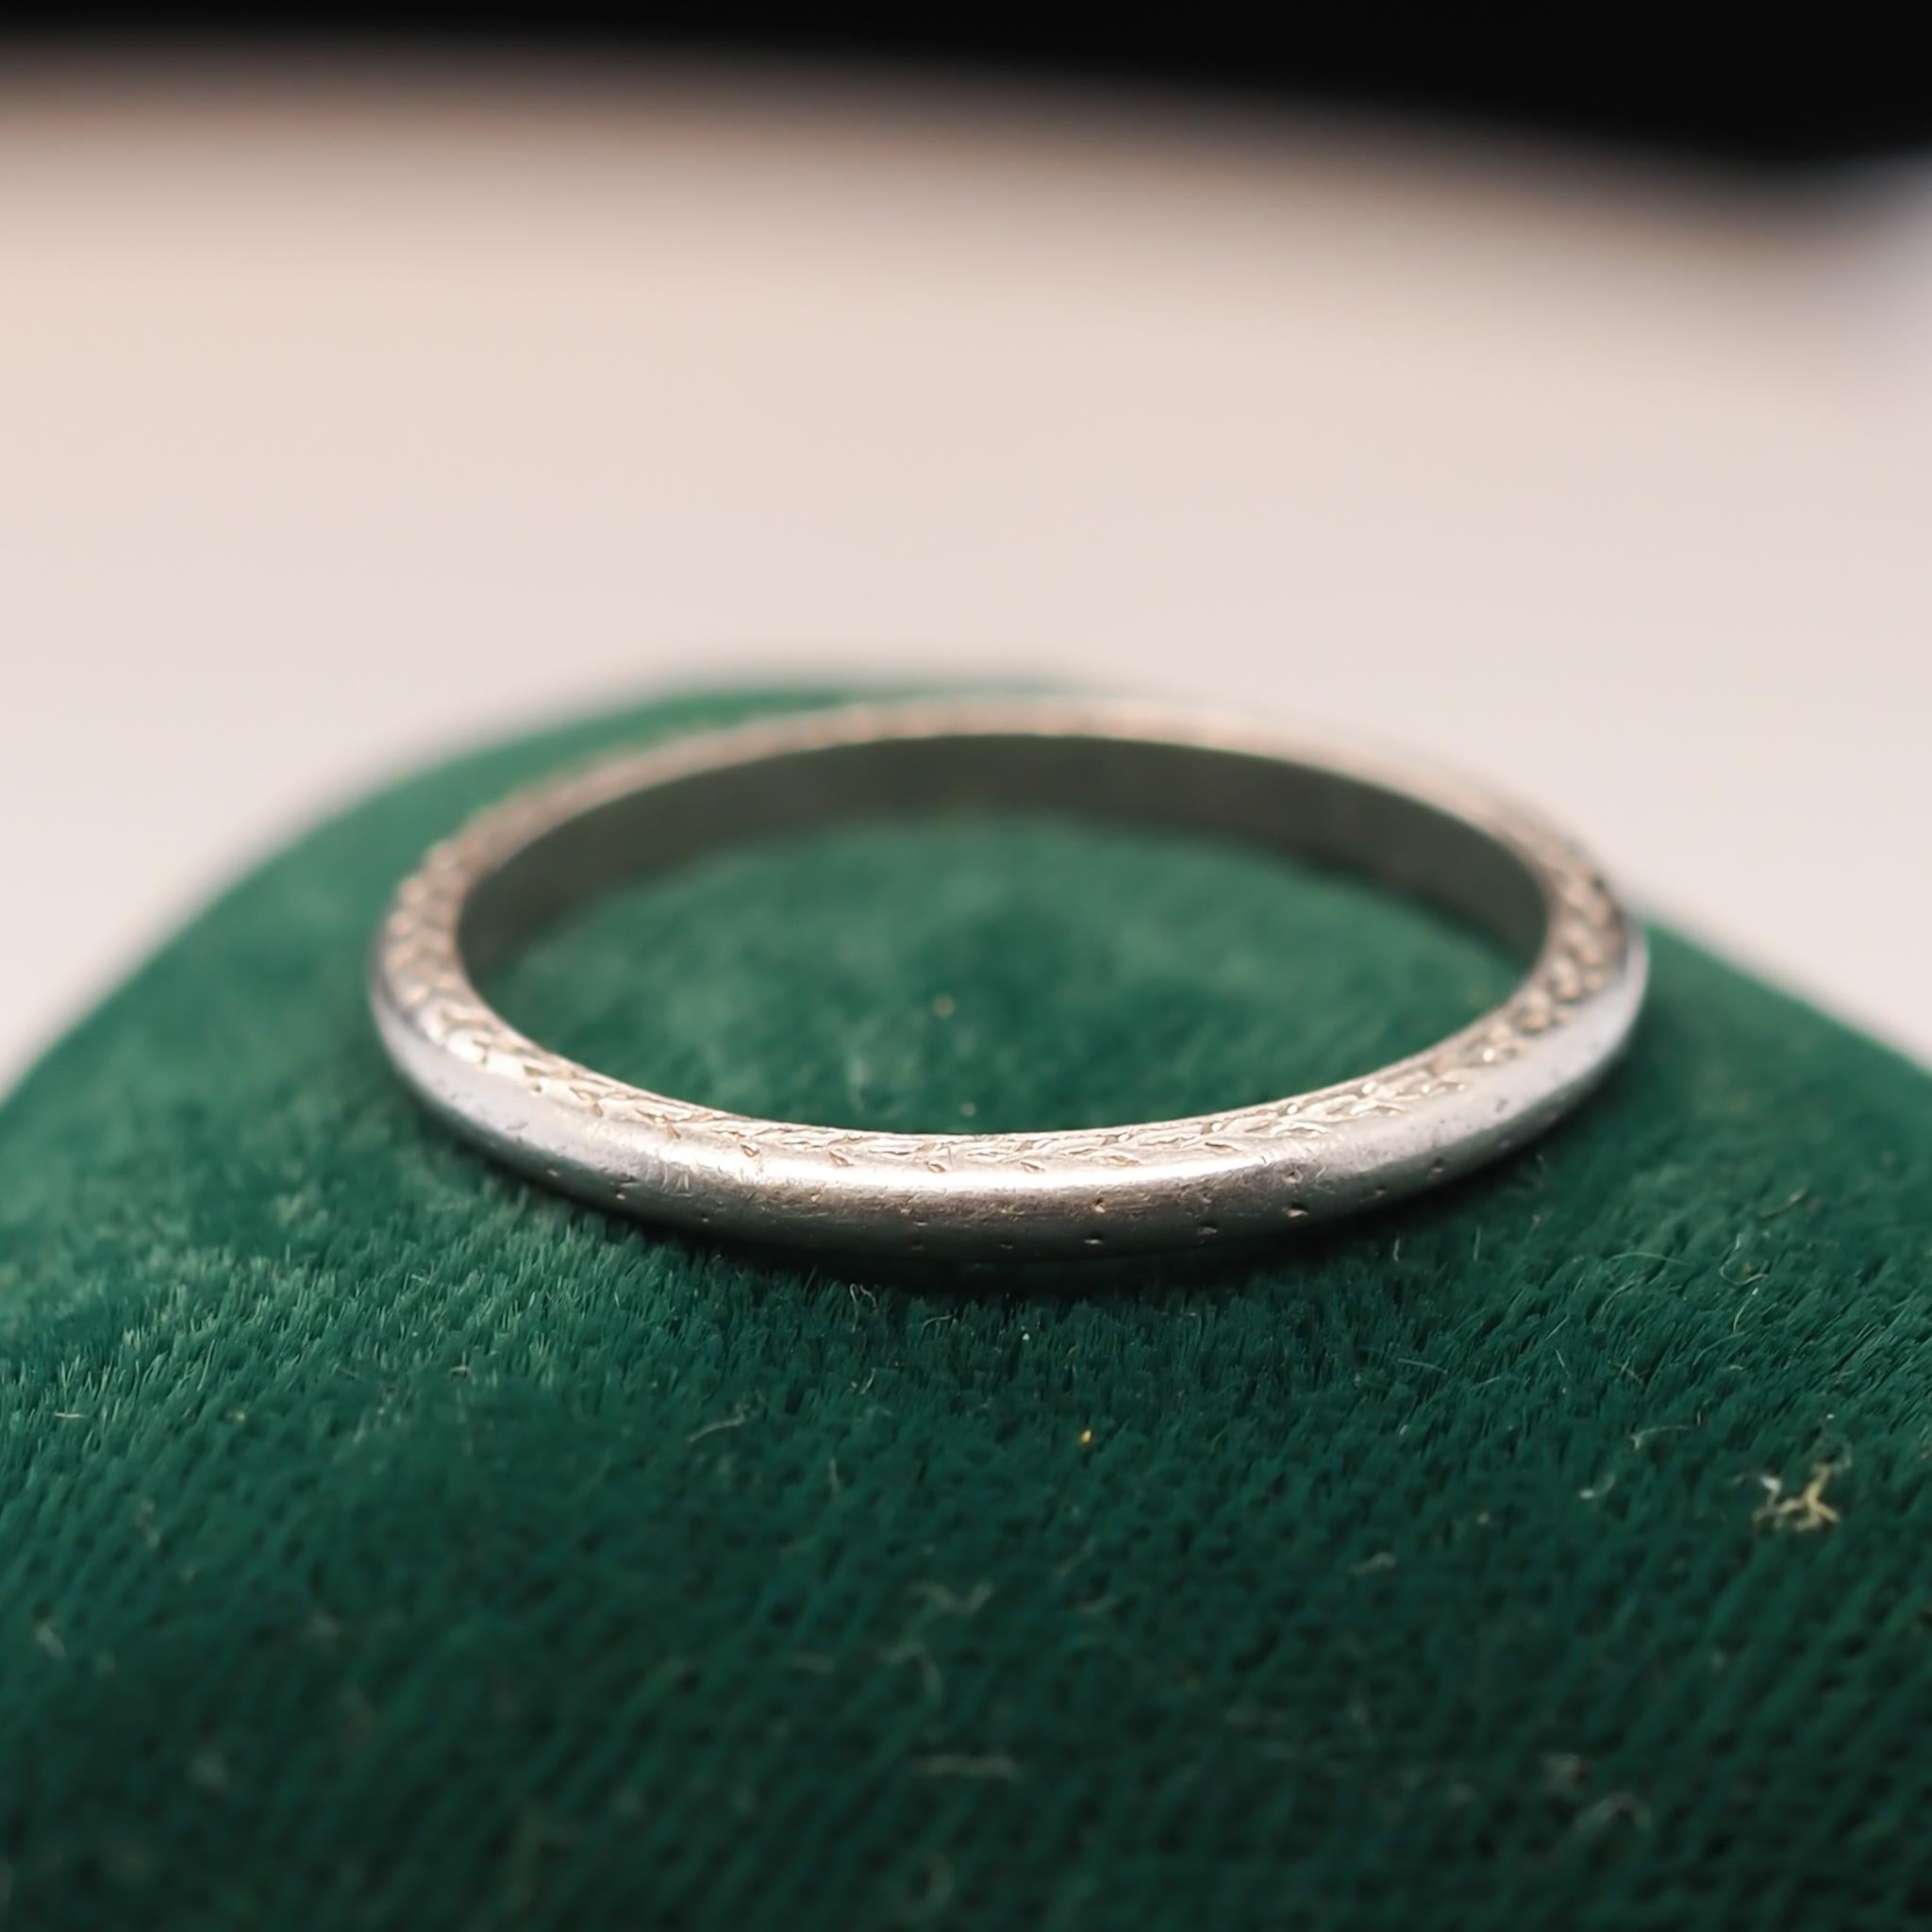 1920s Engraved Platinum Wedding Band In Good Condition For Sale In Atlanta, GA